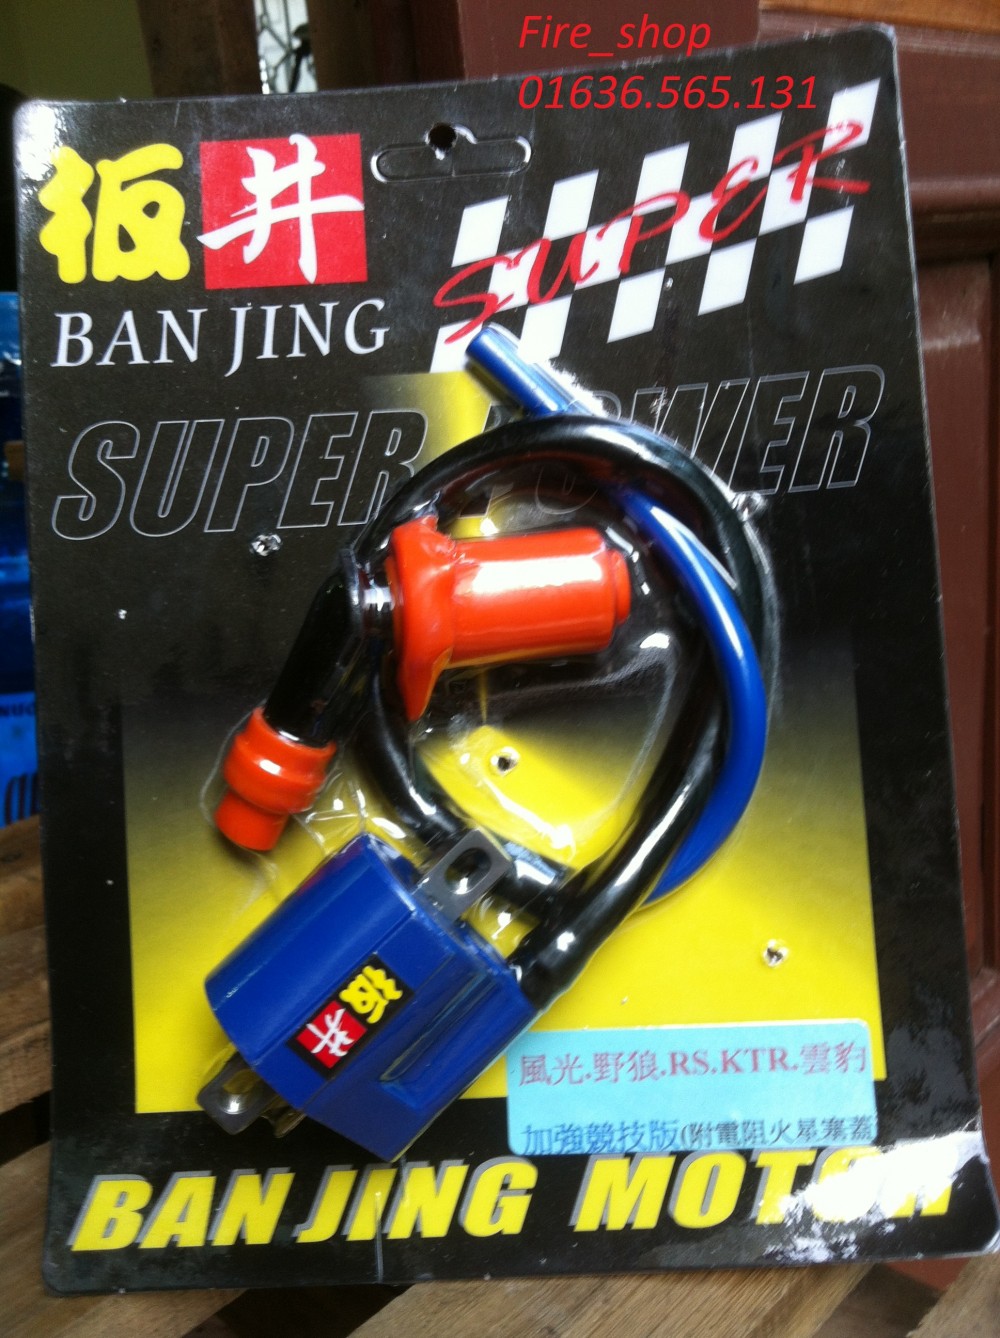 IC banjing horse power racing tim cho Exciter Dream Wave Fire_shop - 6